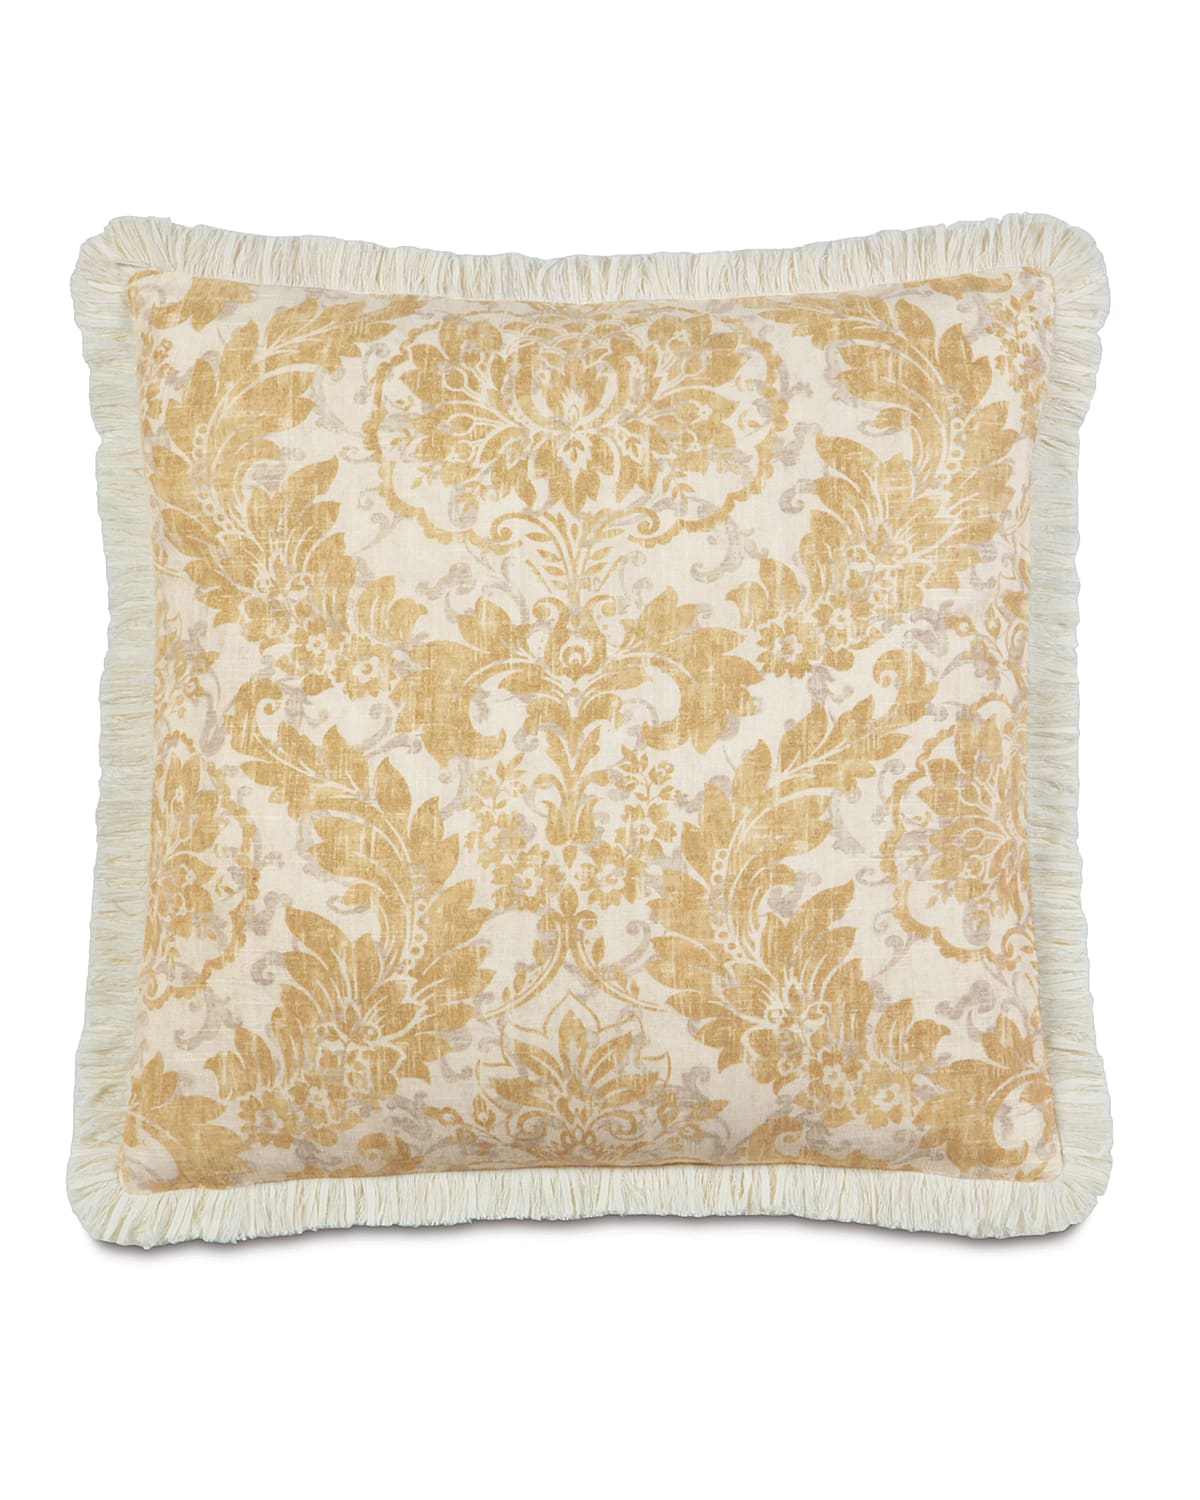 Image Eastern Accents Fringed Sabelle Pillow, 27"Sq.